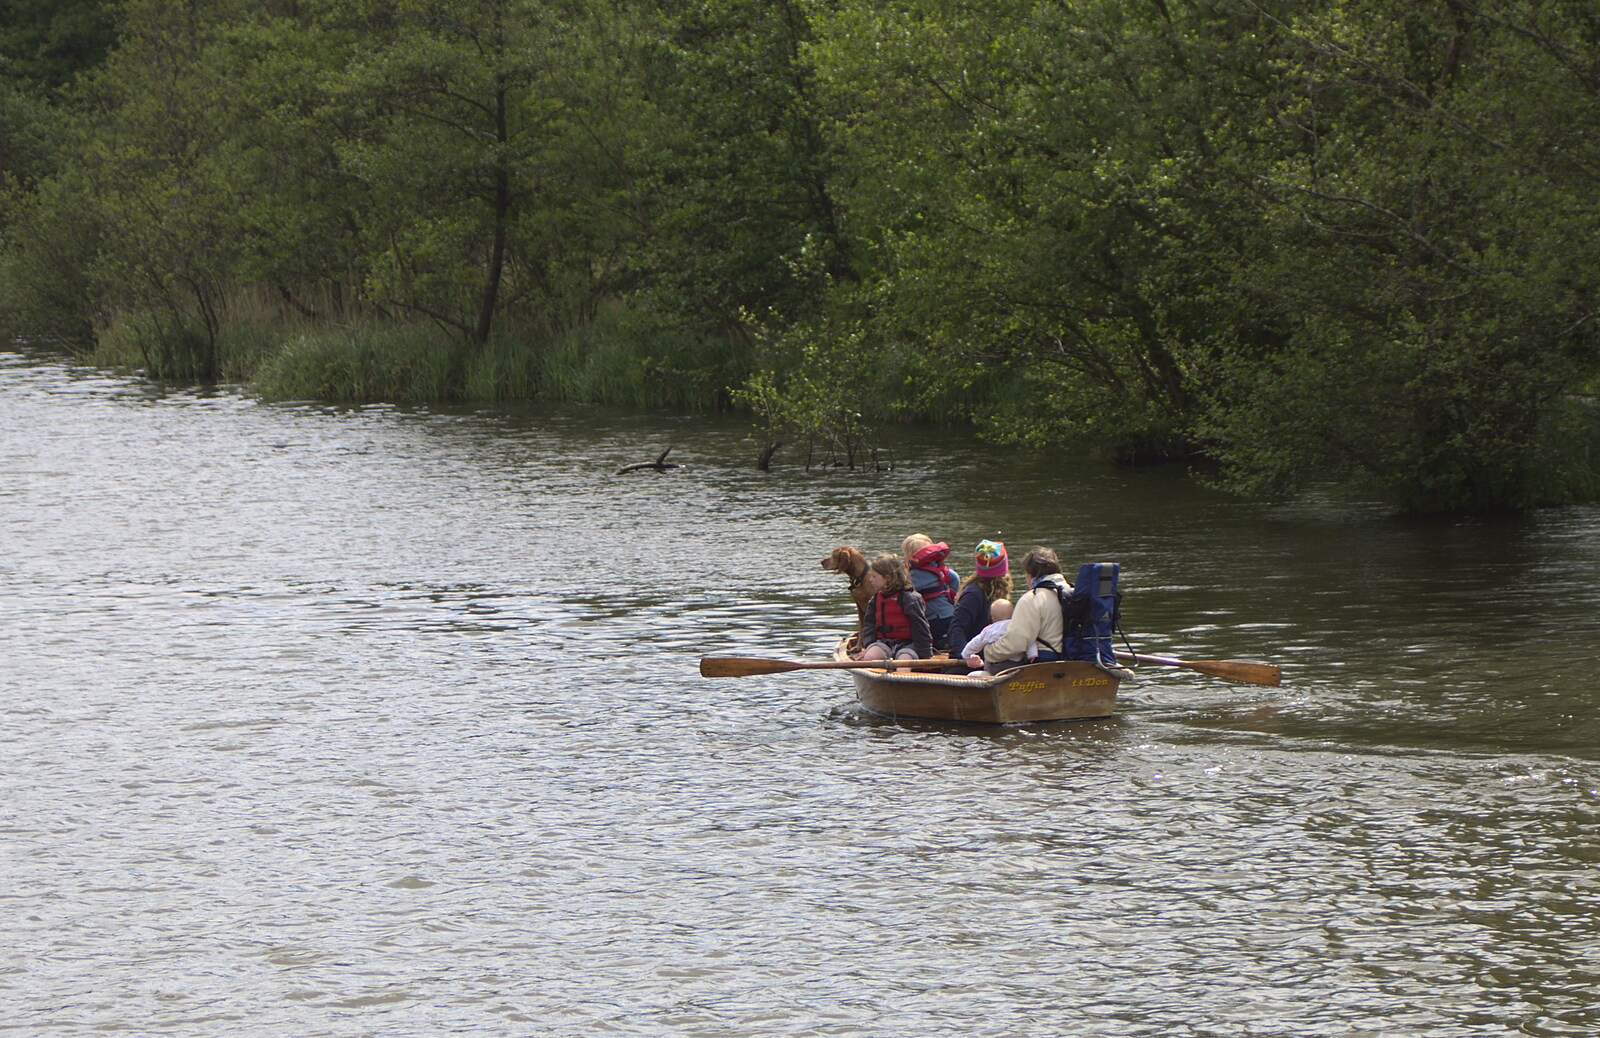 An overloaded dinghy, heading off to sea maybe from A Trip on the Norfolk Broads, Wroxham, Norfolk - 25th May 2013